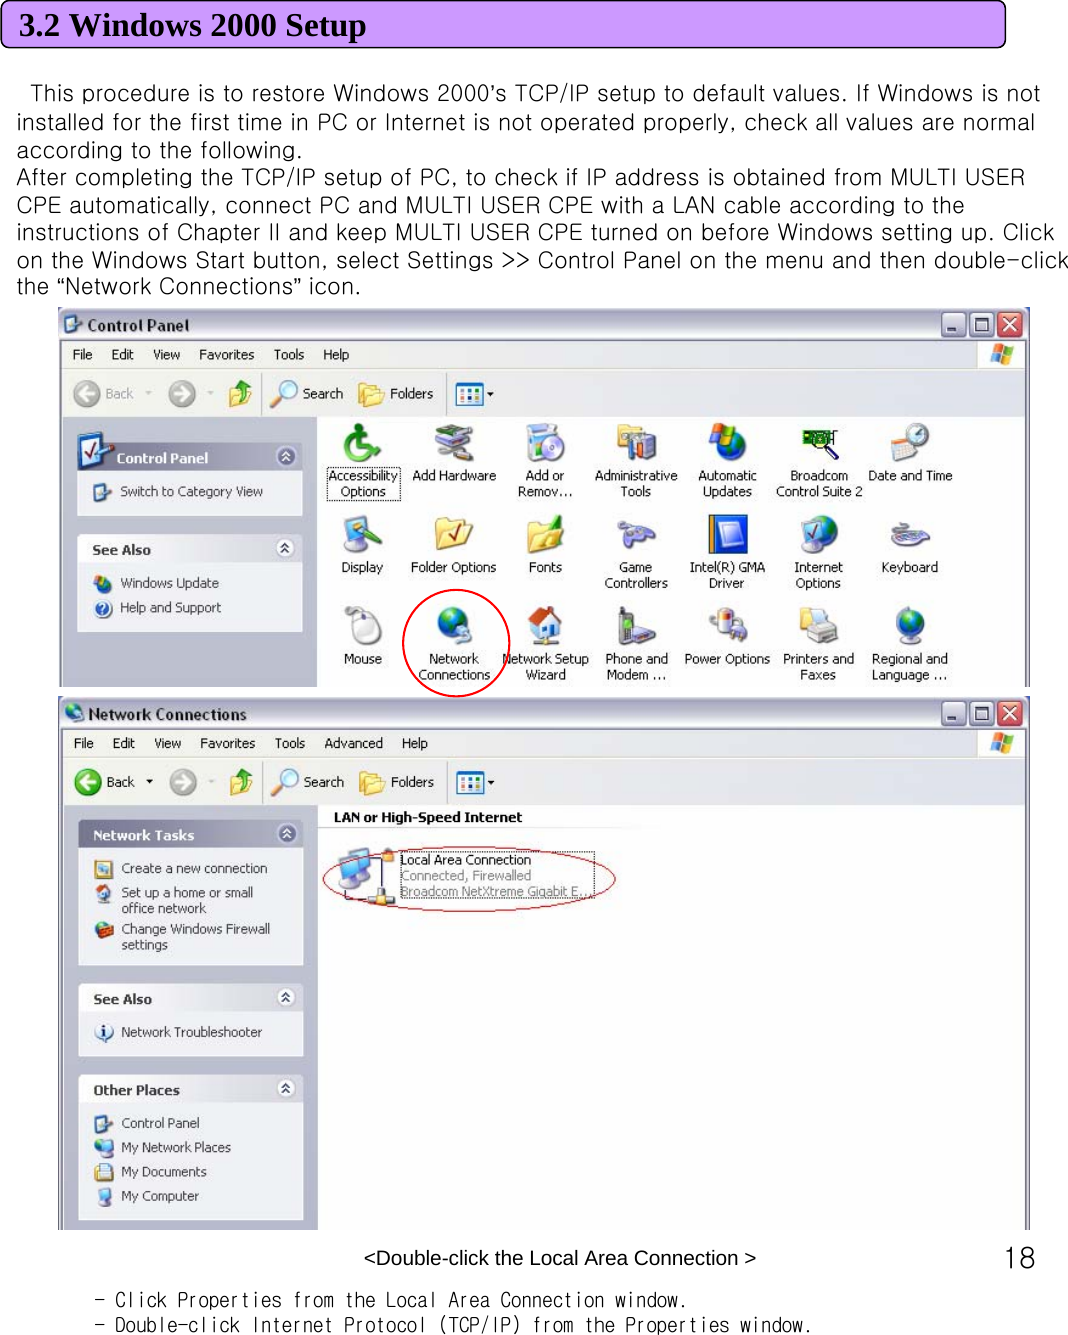 183.2 Windows 2000 SetupThis procedure is to restore Windows 2000’s TCP/IP setup to default values. If Windows is not installed for the first time in PC or Internet is not operated properly, check all values are normal according to the following. After completing the TCP/IP setup of PC, to check if IP address is obtained from MULTI USER CPE automatically, connect PC and MULTI USER CPE with a LAN cable according to the instructions of Chapter II and keep MULTI USER CPE turned on before Windows setting up. Click on the Windows Start button, select Settings &gt;&gt; Control Panel on the menu and then double-click the “Network Connections”icon. &lt;Double-click the Local Area Connection &gt; - Click Properties from the Local Area Connection window.- Double-click Internet Protocol (TCP/IP) from the Properties window.